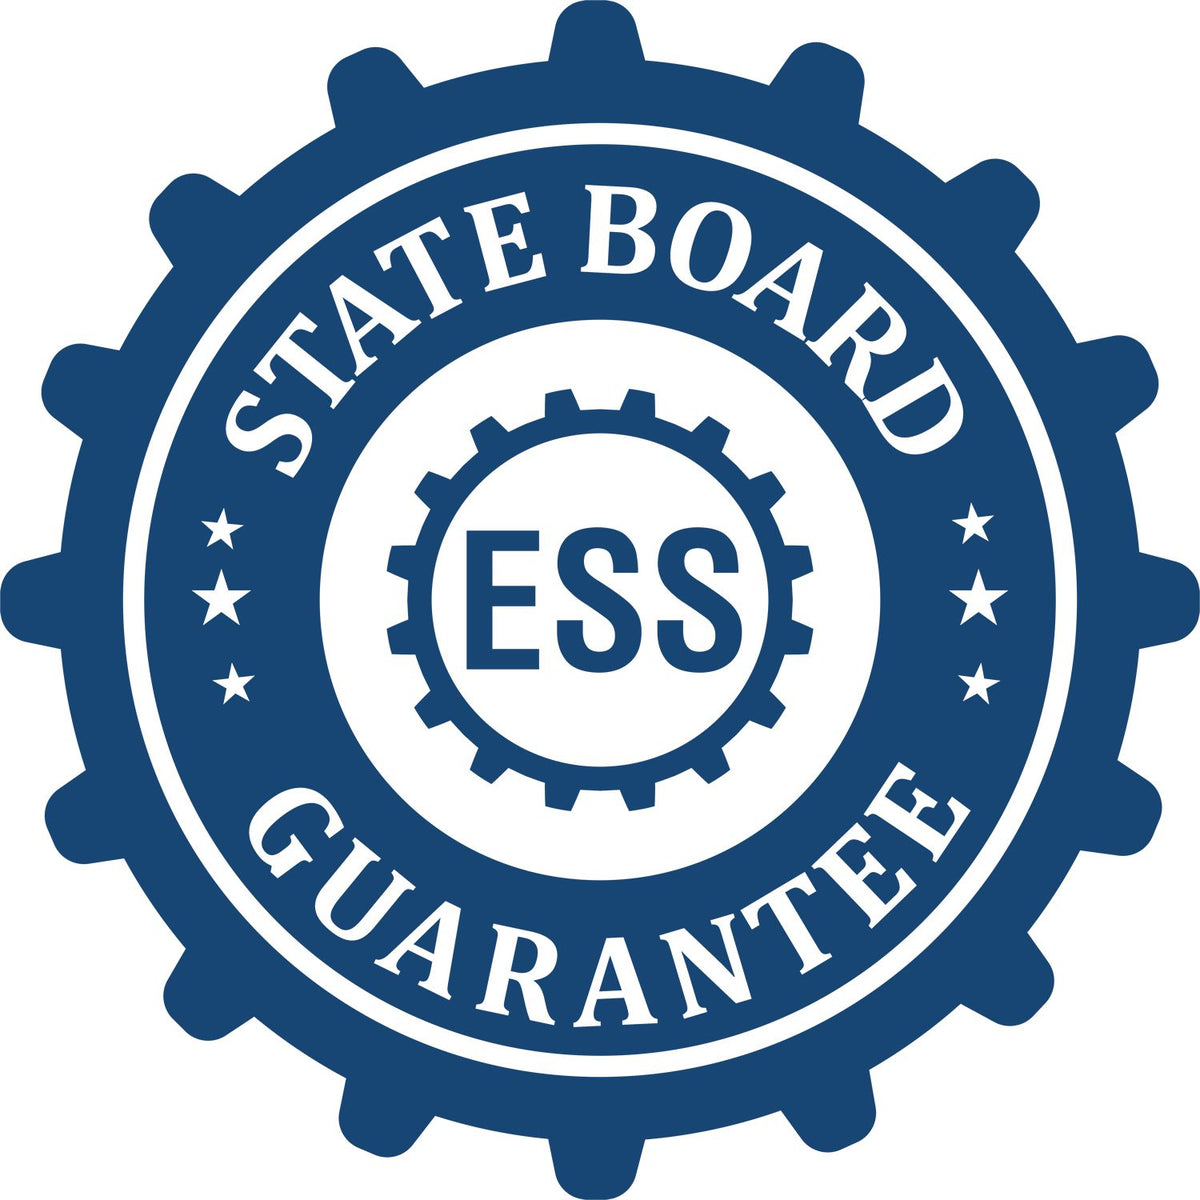 An emblem in a gear shape illustrating a state board guarantee for the Wooden Handle Oregon Rectangular Notary Public Stamp product.